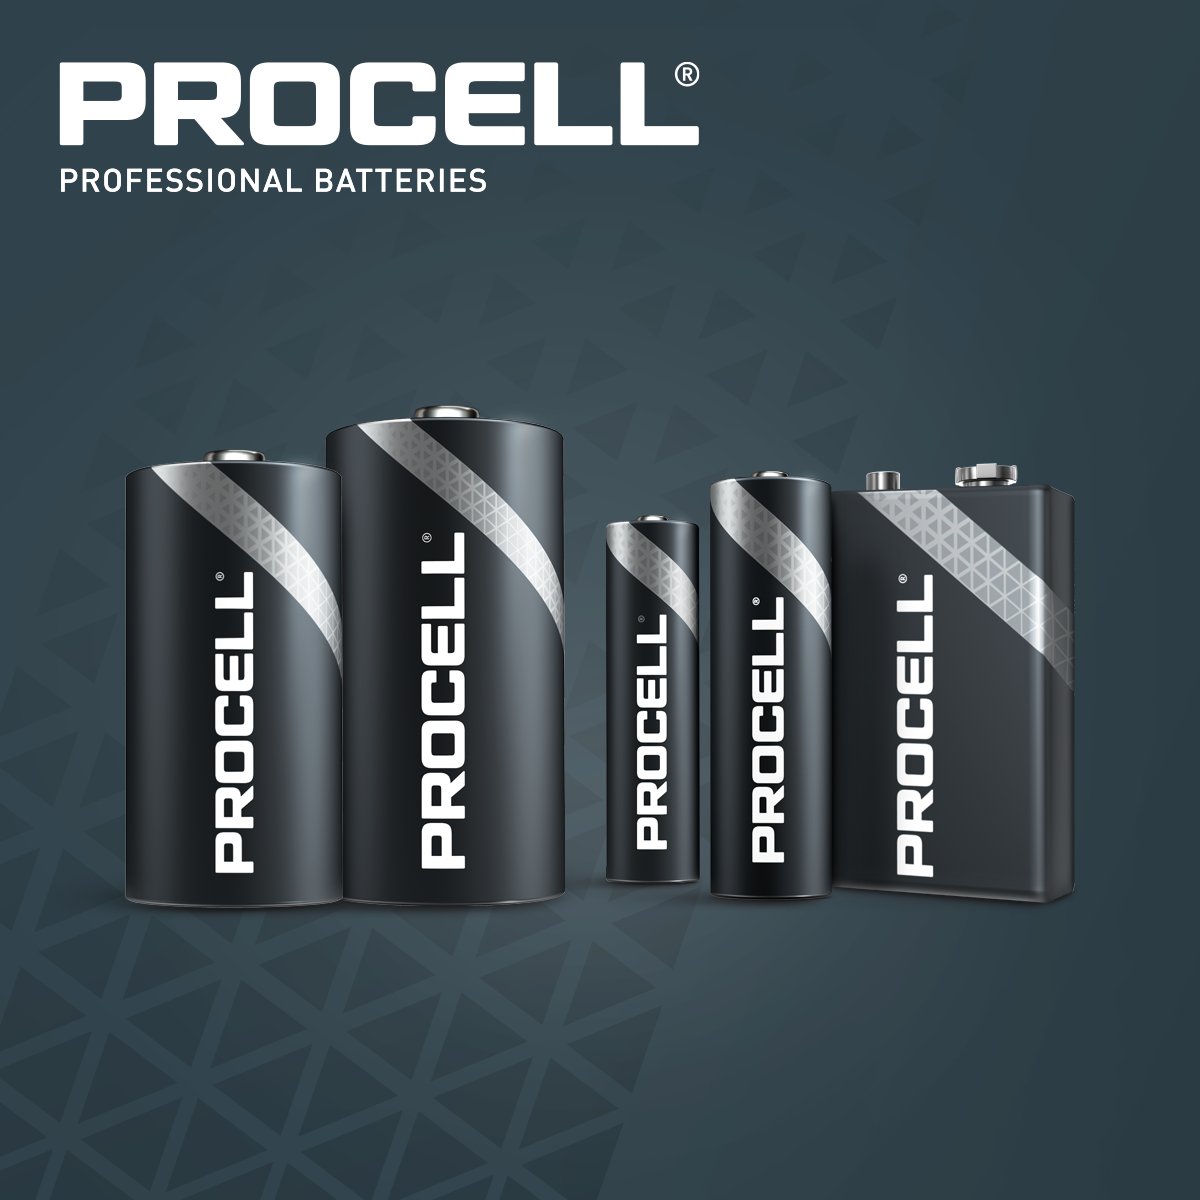 PROCELL FAMILY